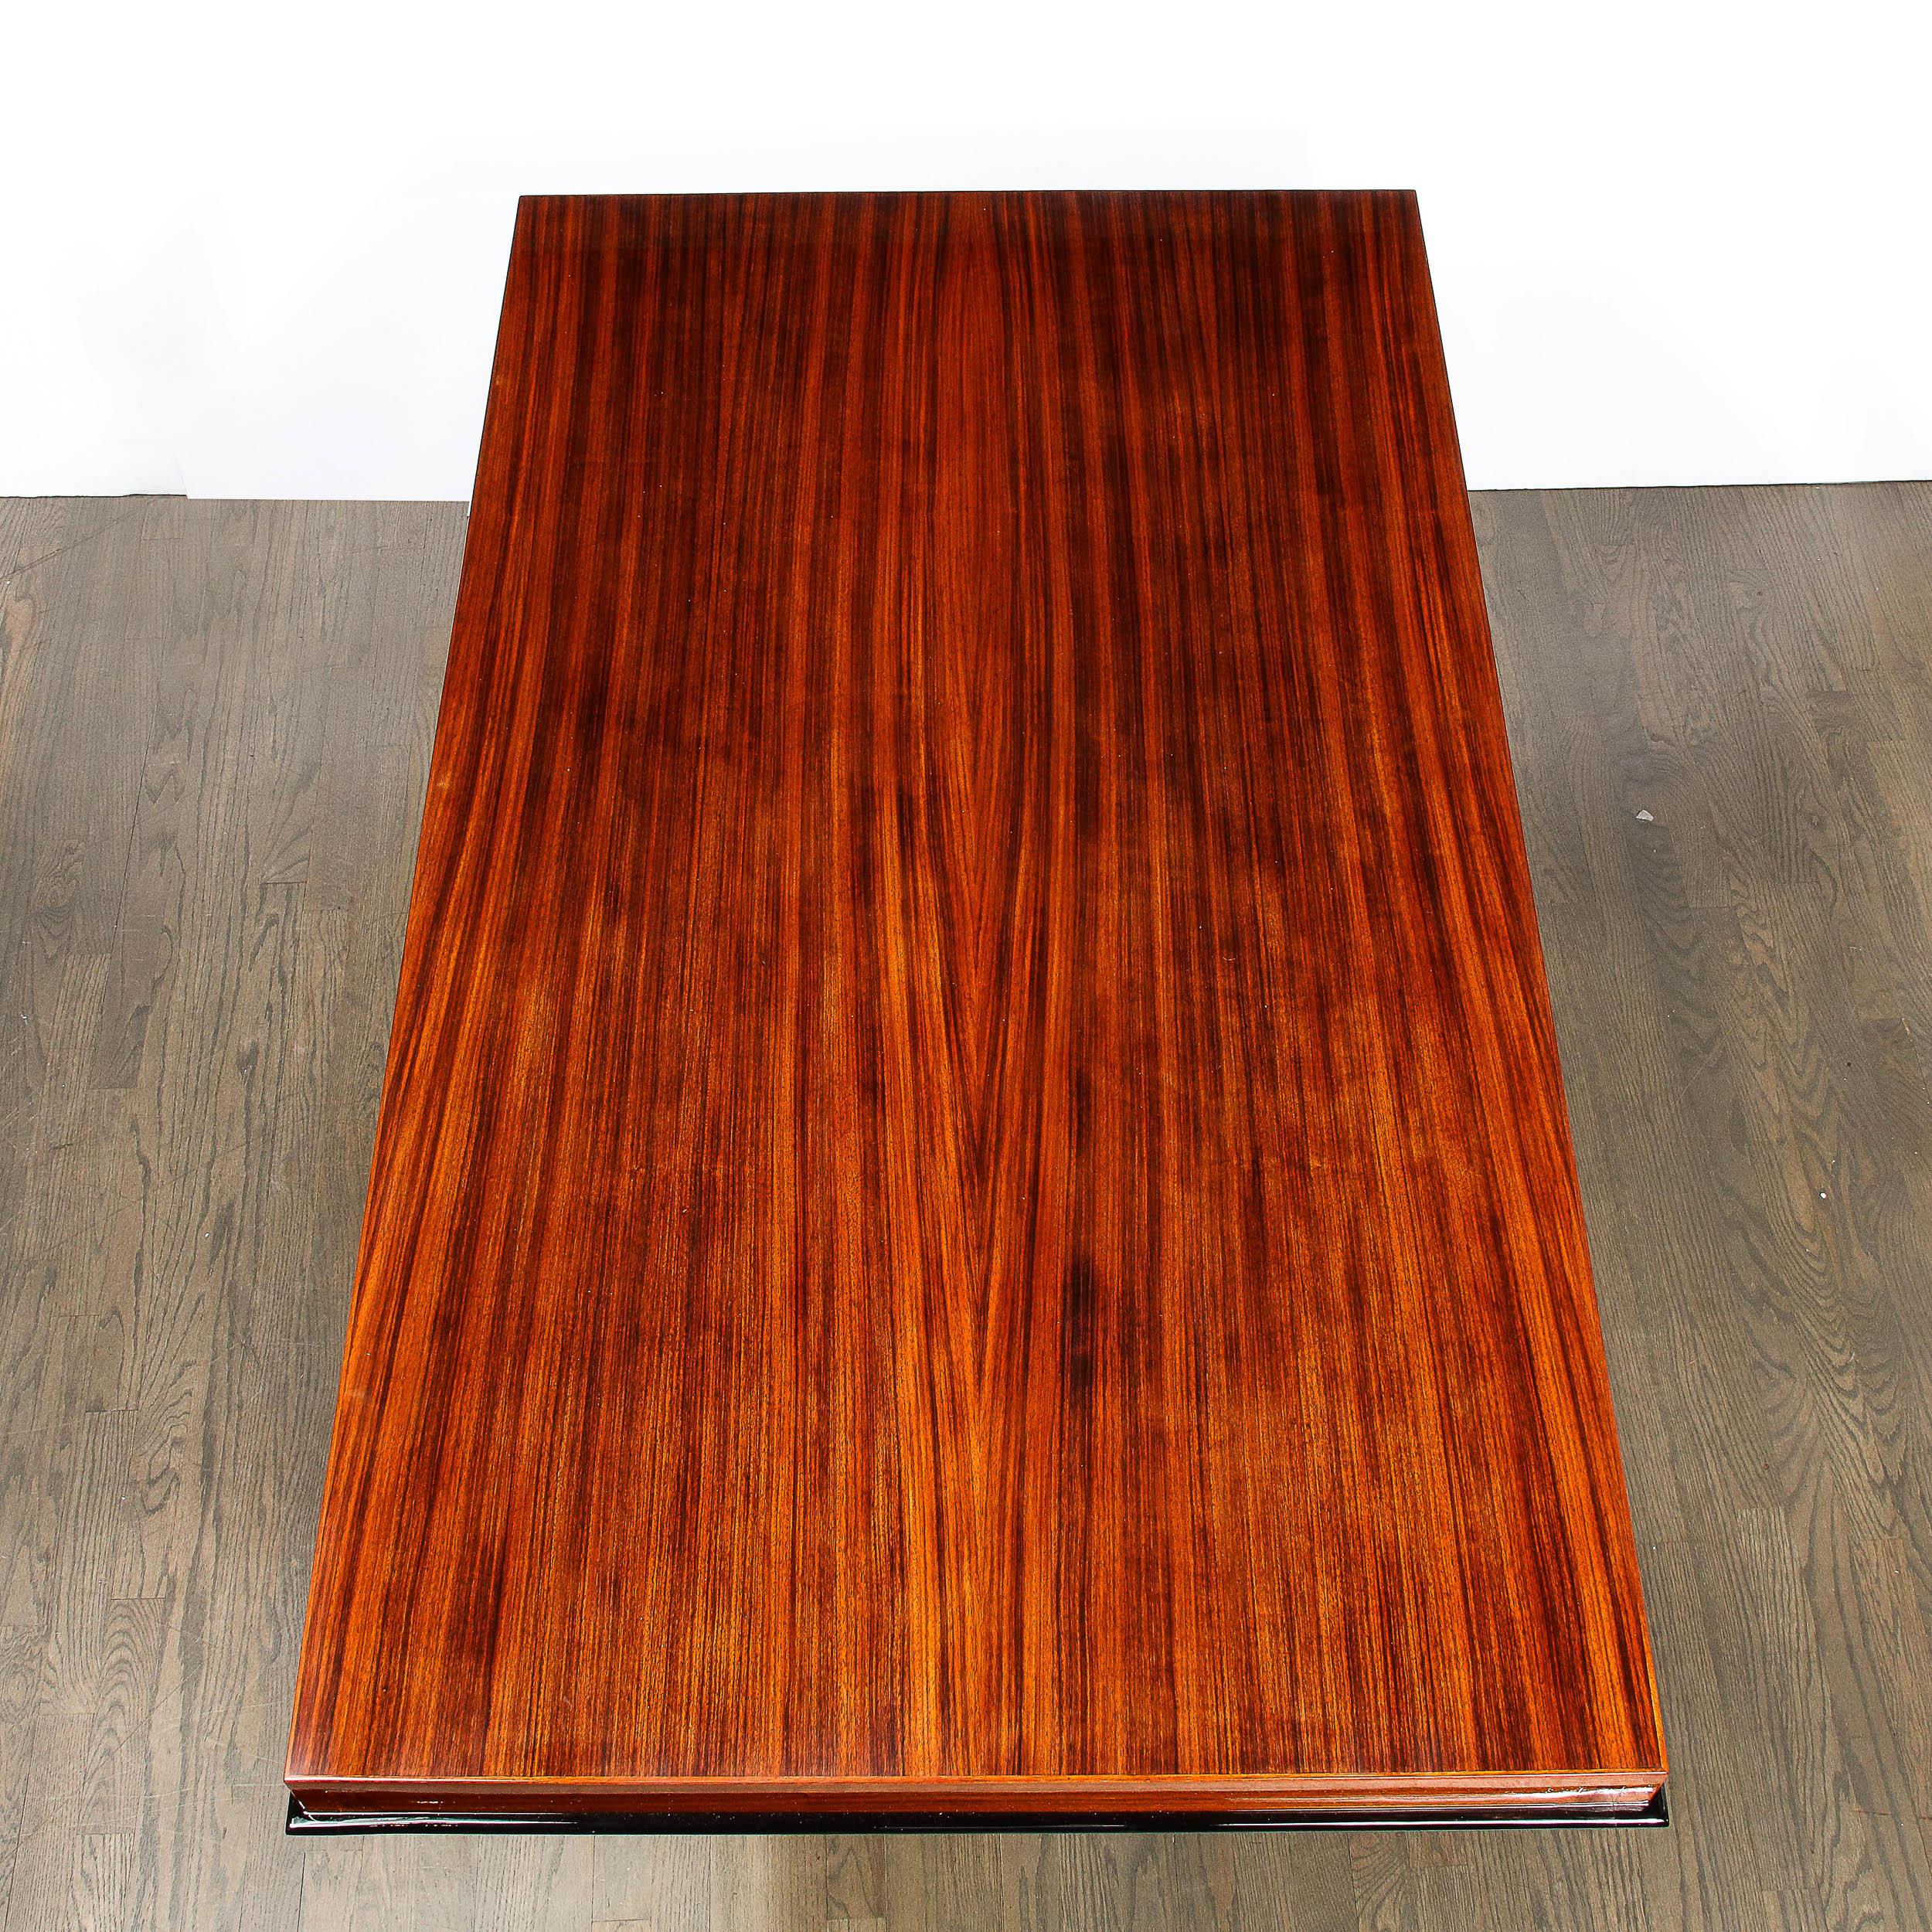 This stunning Art Deco Machine Age cubist dining table was realized in France circa 1935. It features a two tier rectangular skyscraper style base consisting of a rosewood bottom (with a black lacquer top) with another rectangular form (of a smaller